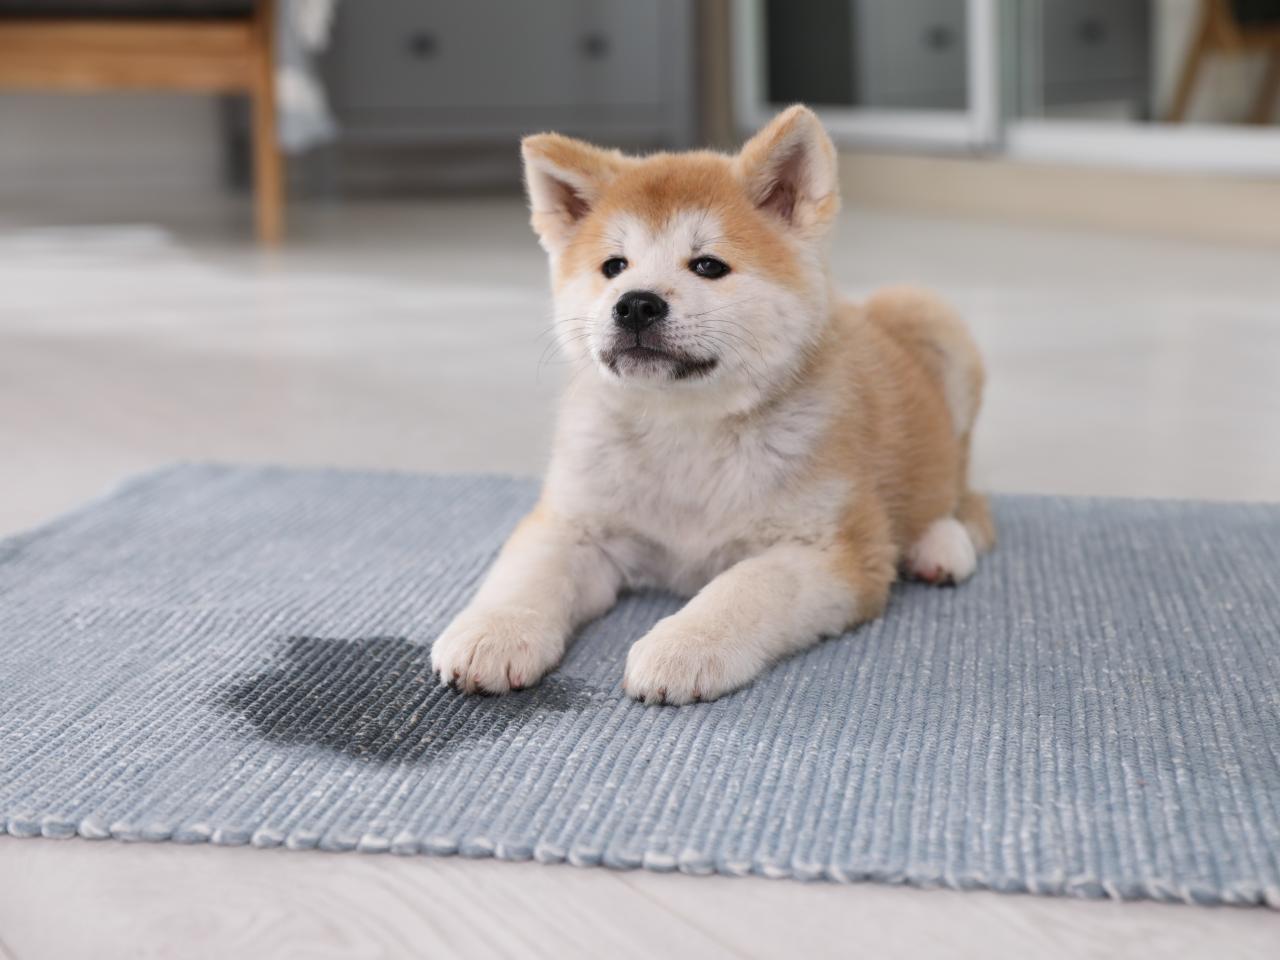 How To Get Pet Stains Out Of Carpet Hgtv